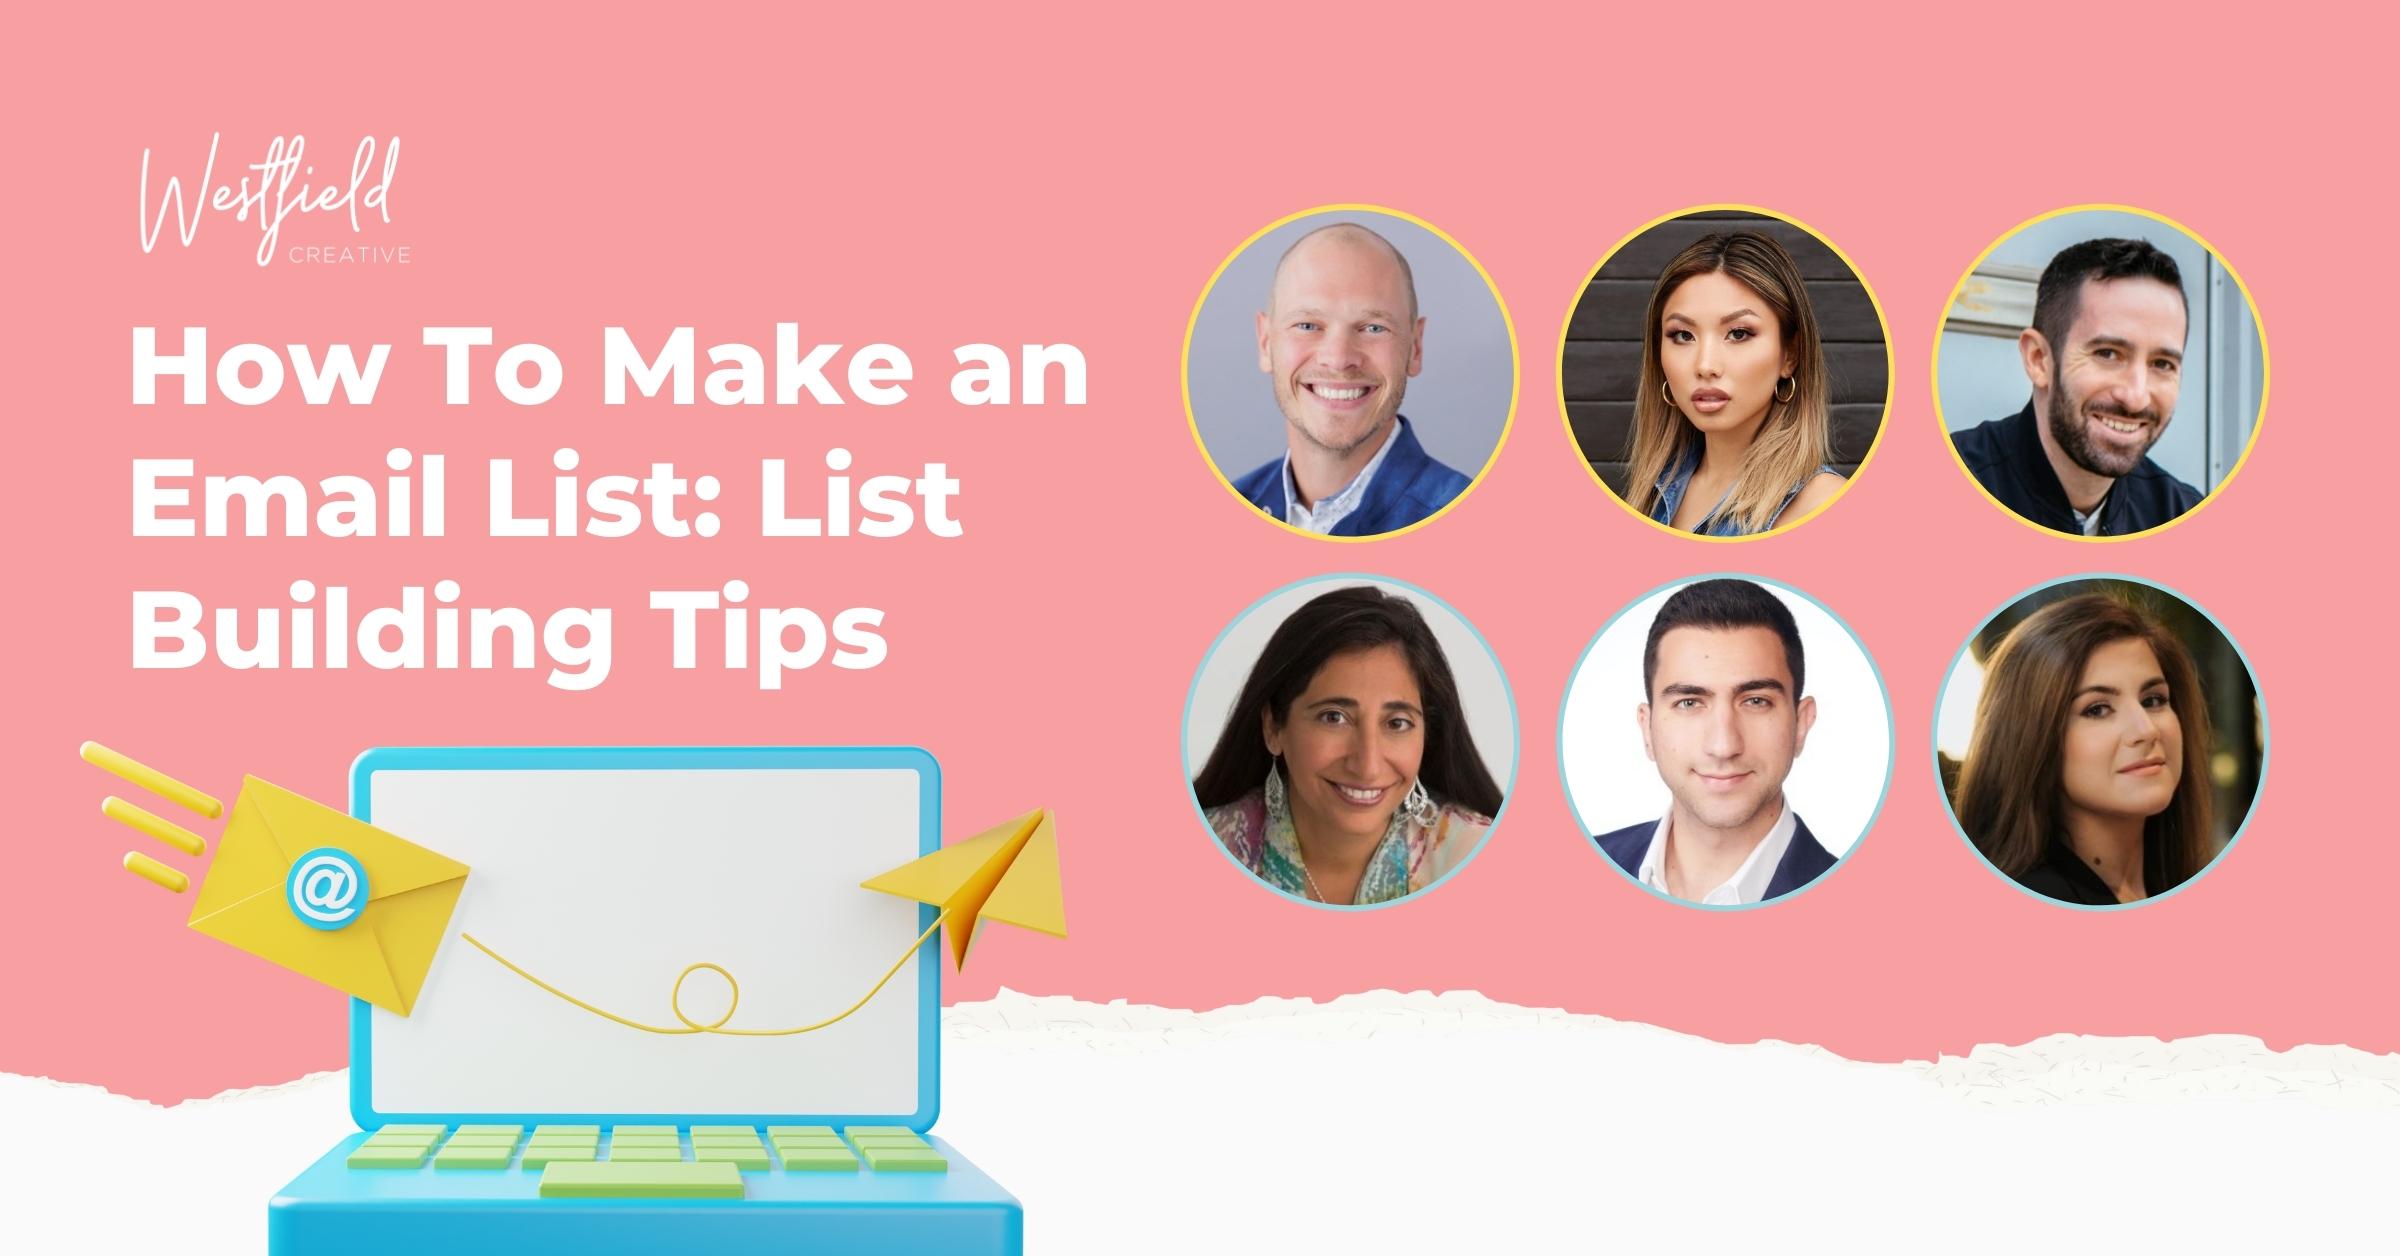 How To Make an Email List_ List Building Tips (1)